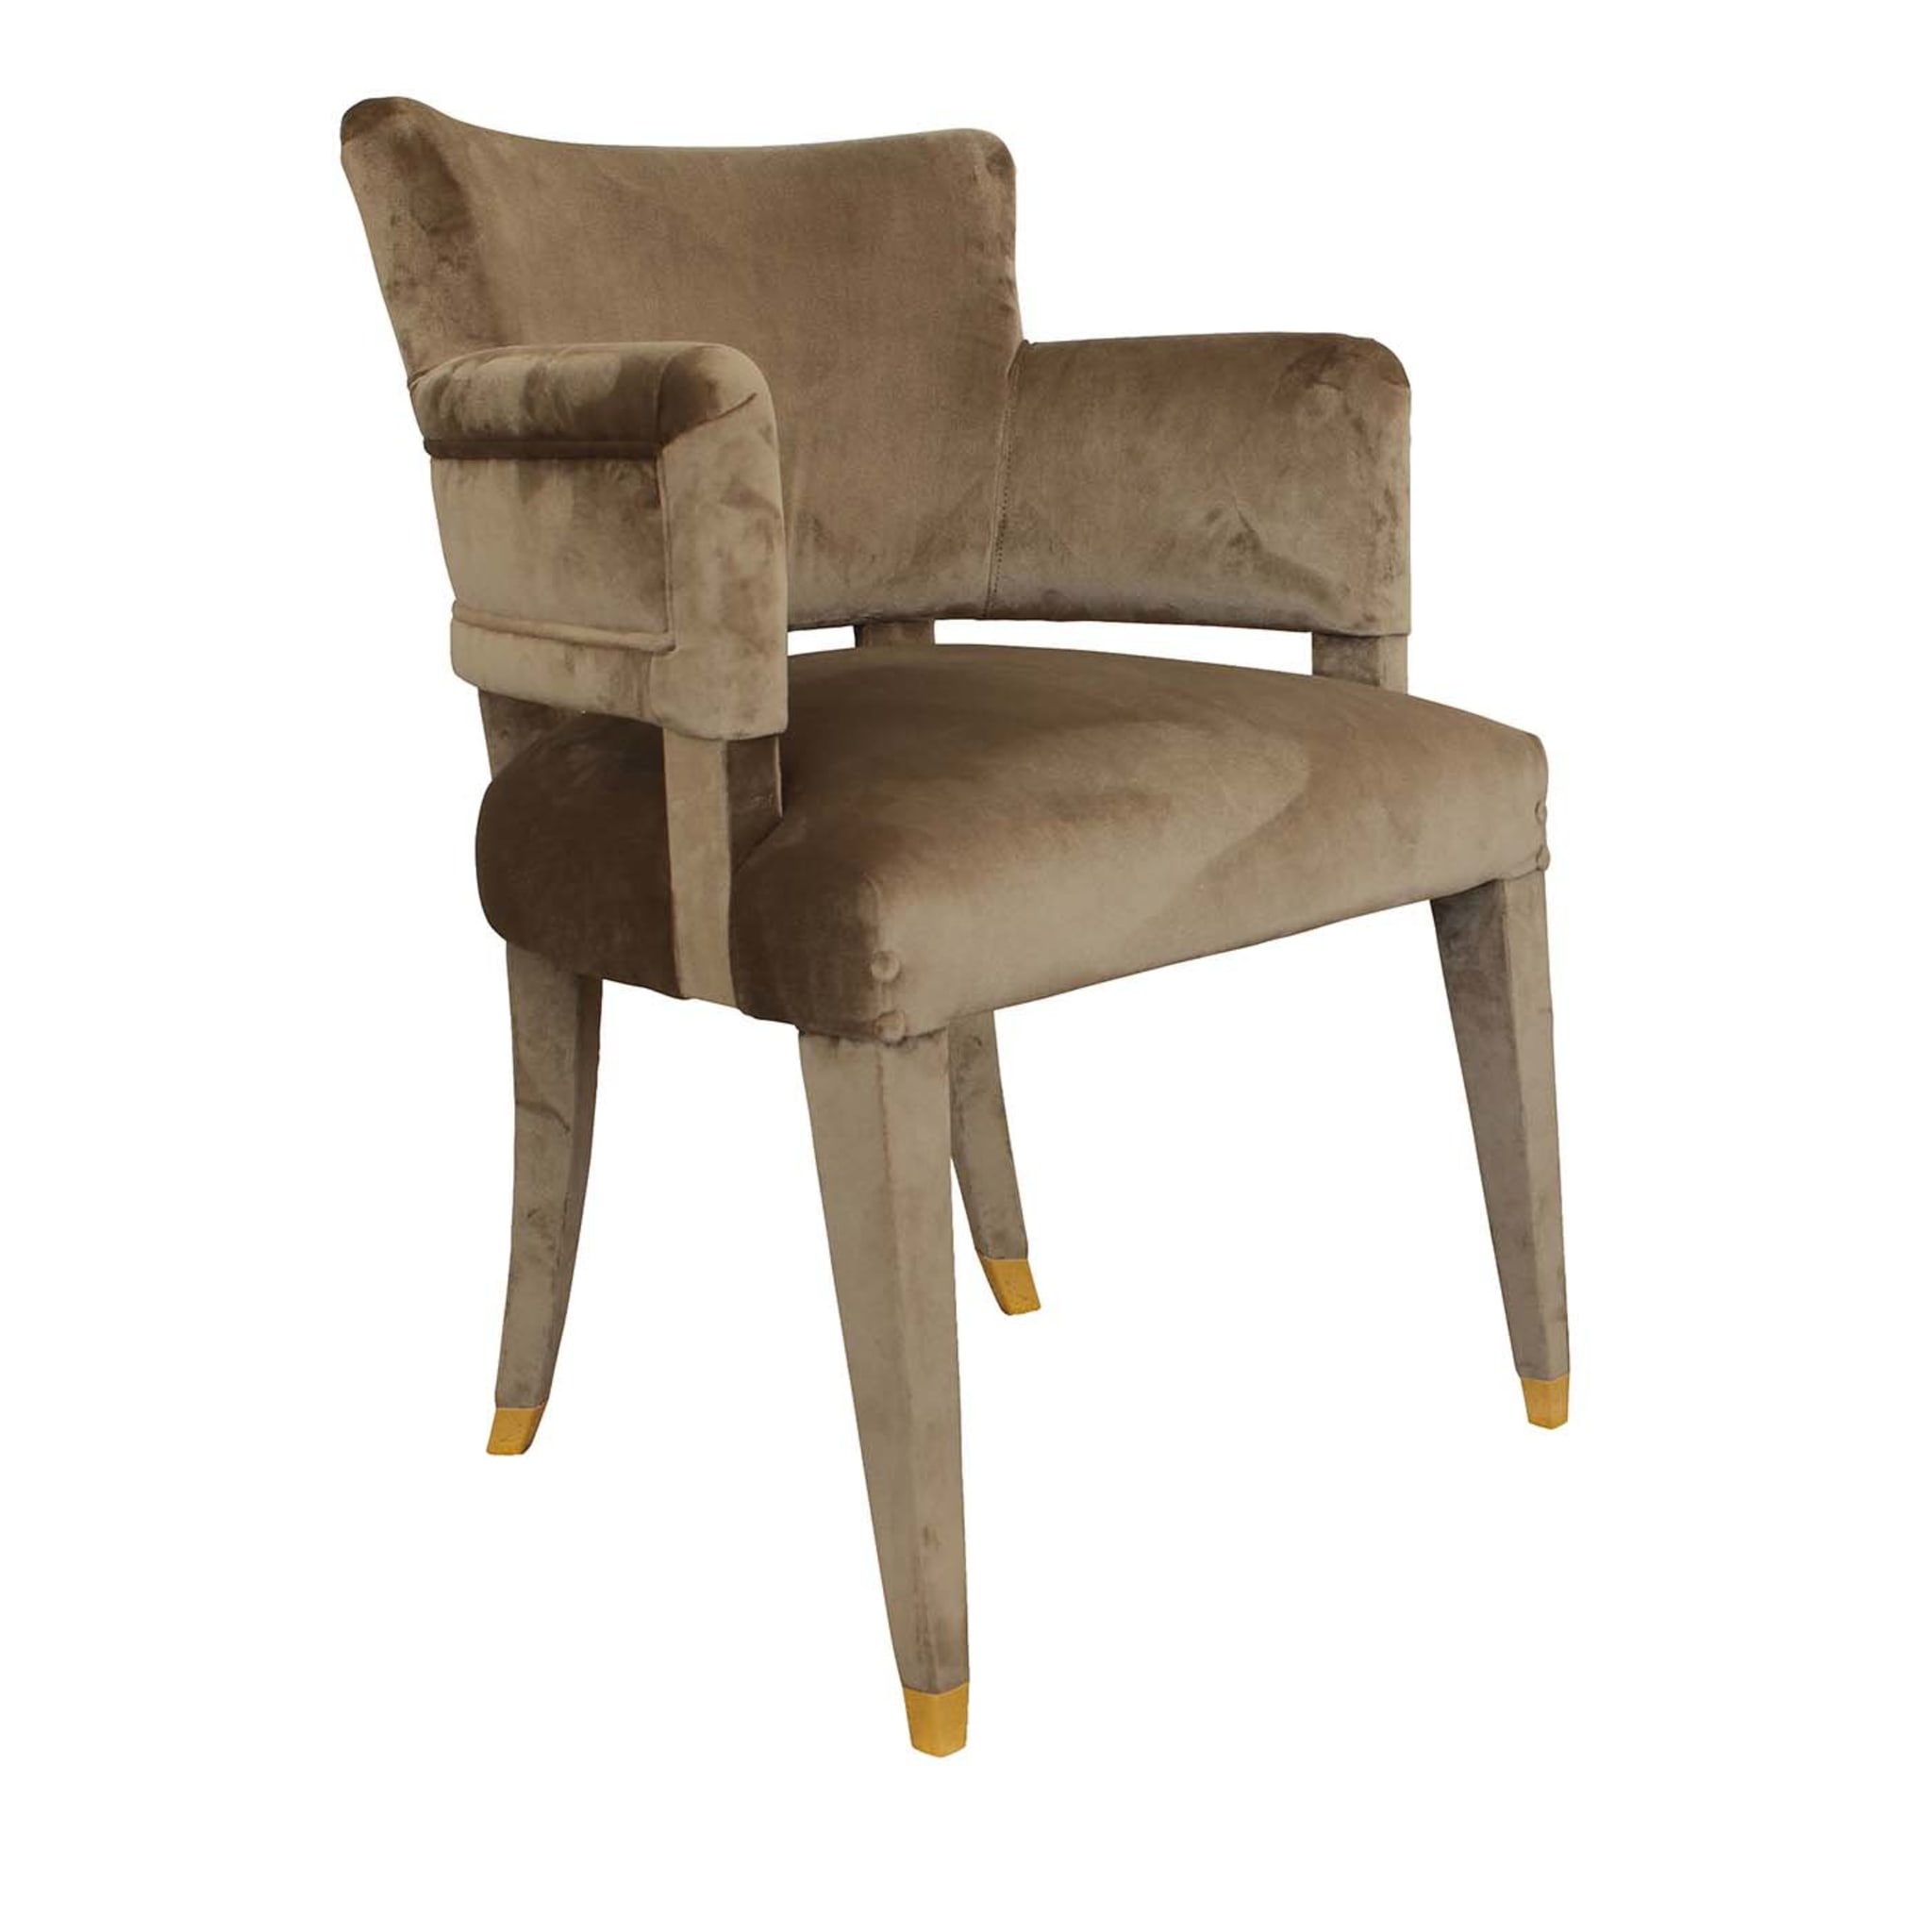 Class Brown Dining Chair #2 - Main view